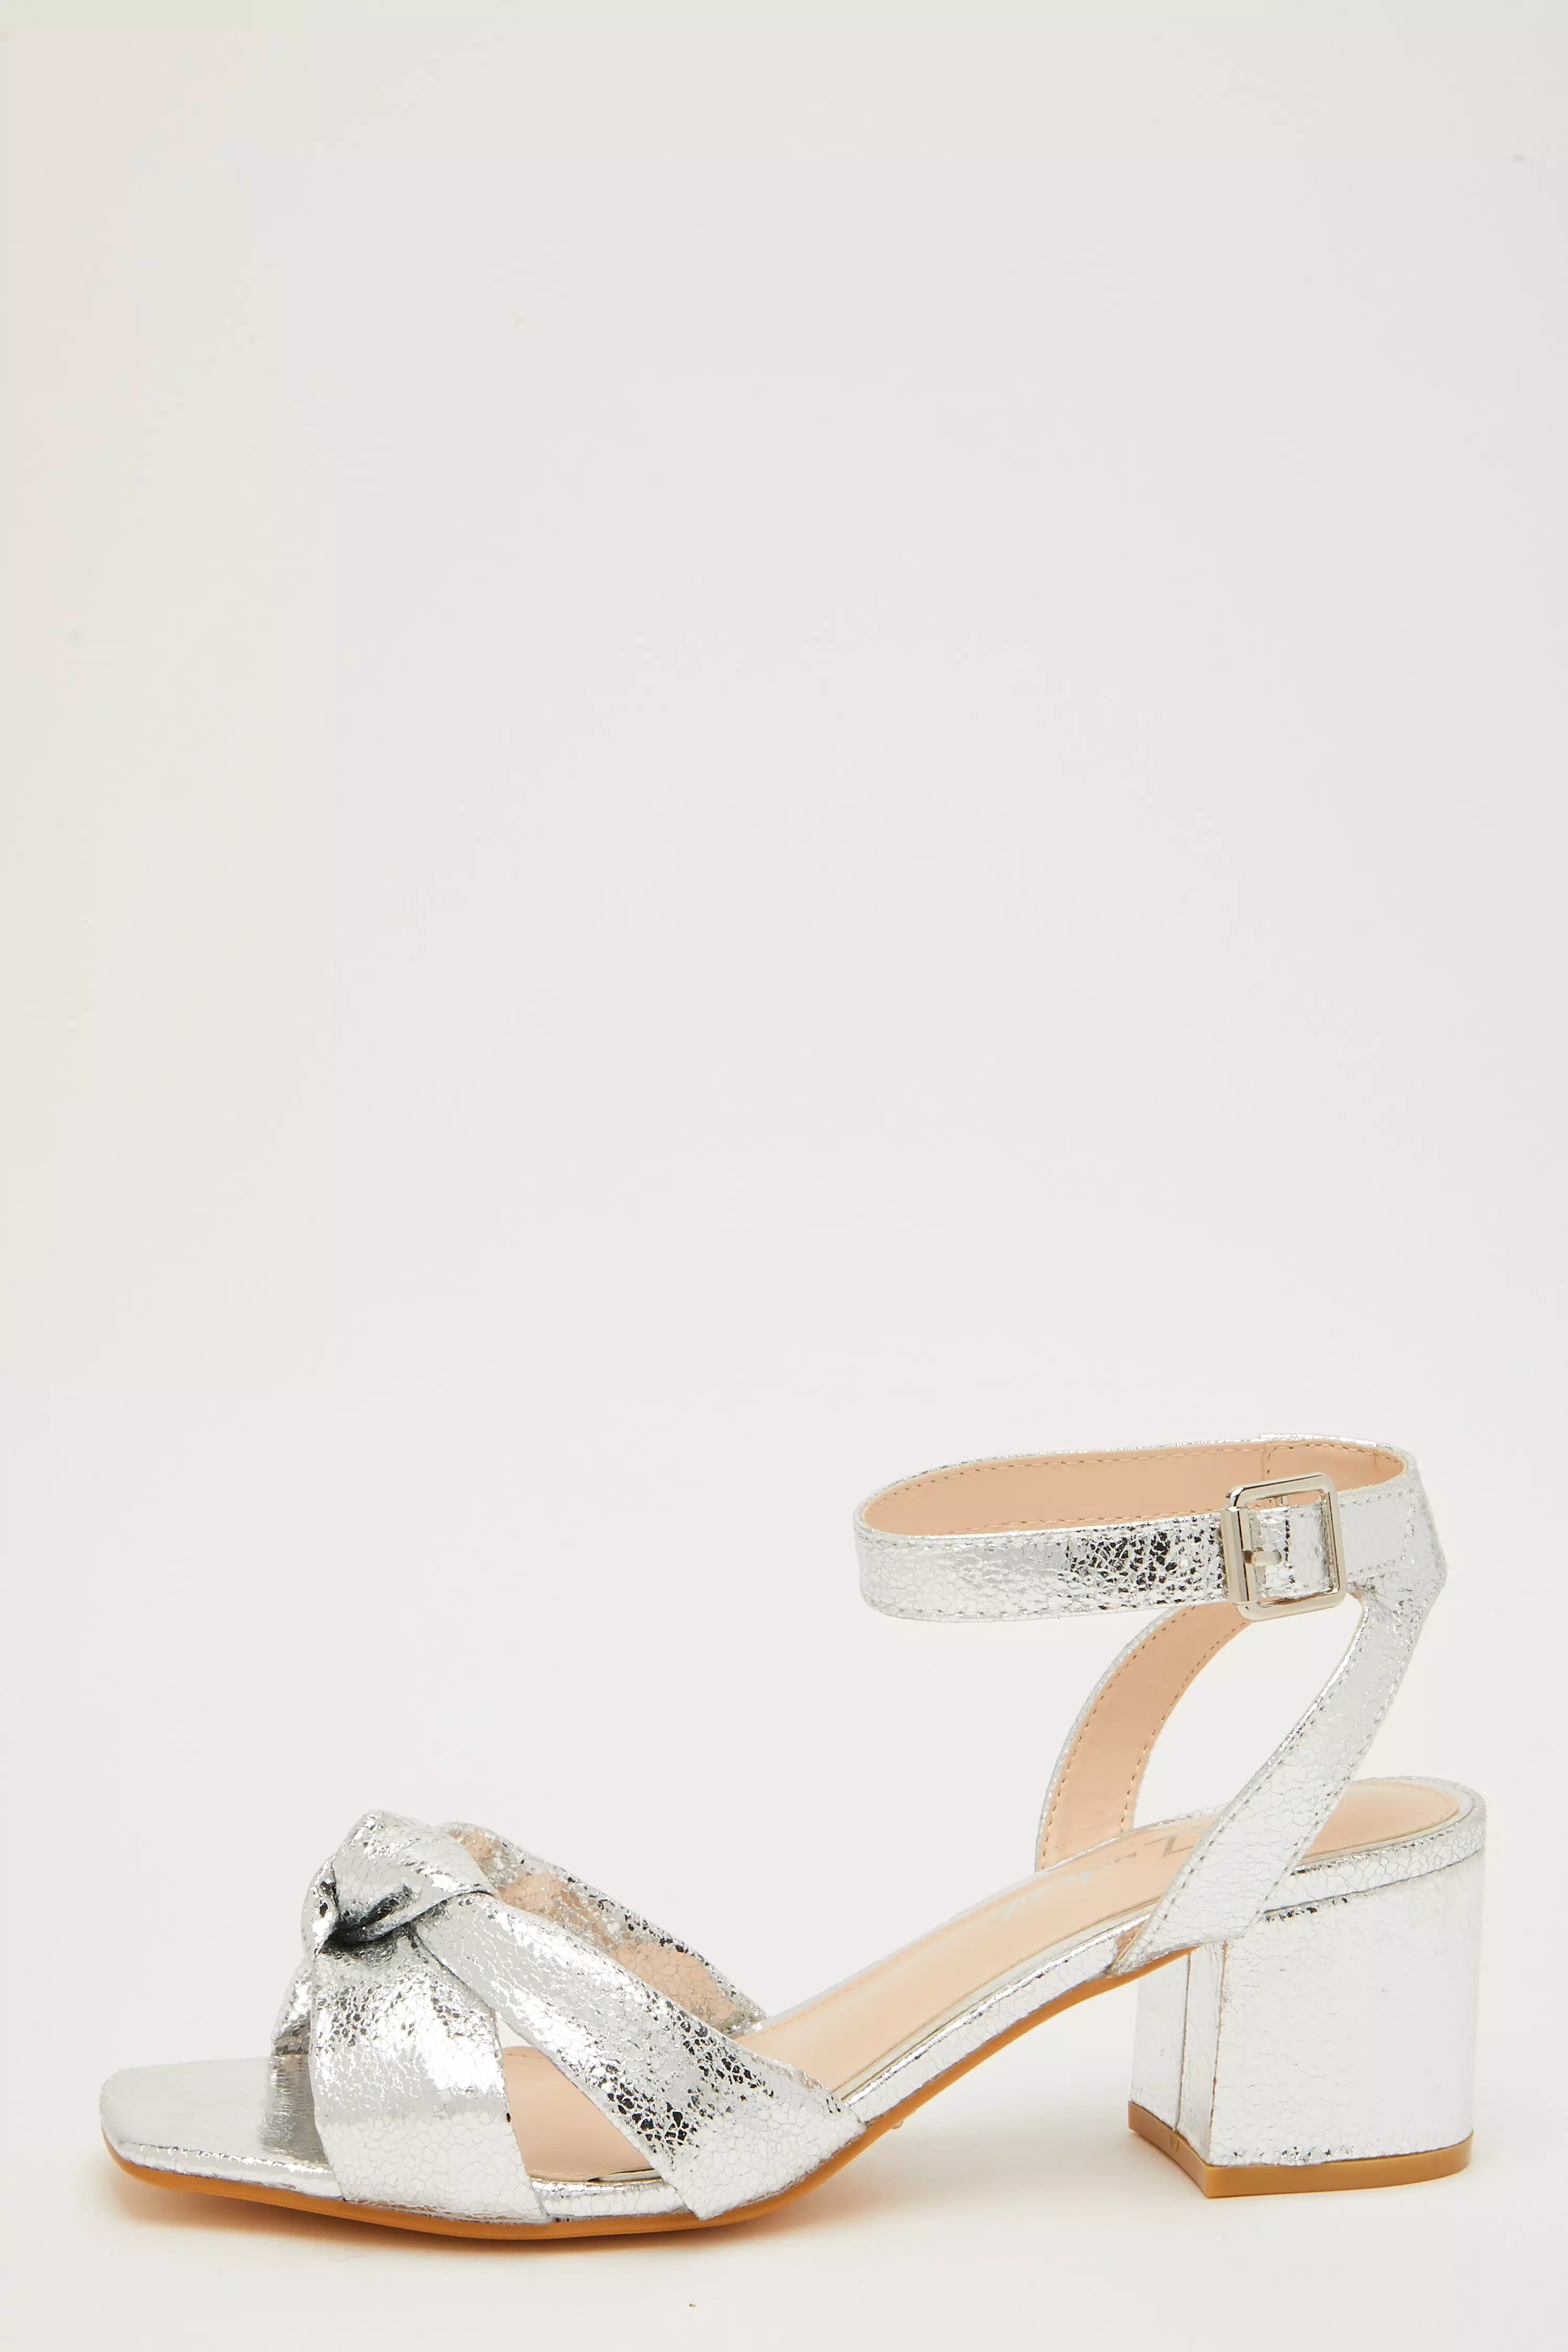 Wide Fit Silver Knot Heeled Sandals - QUIZ Clothing